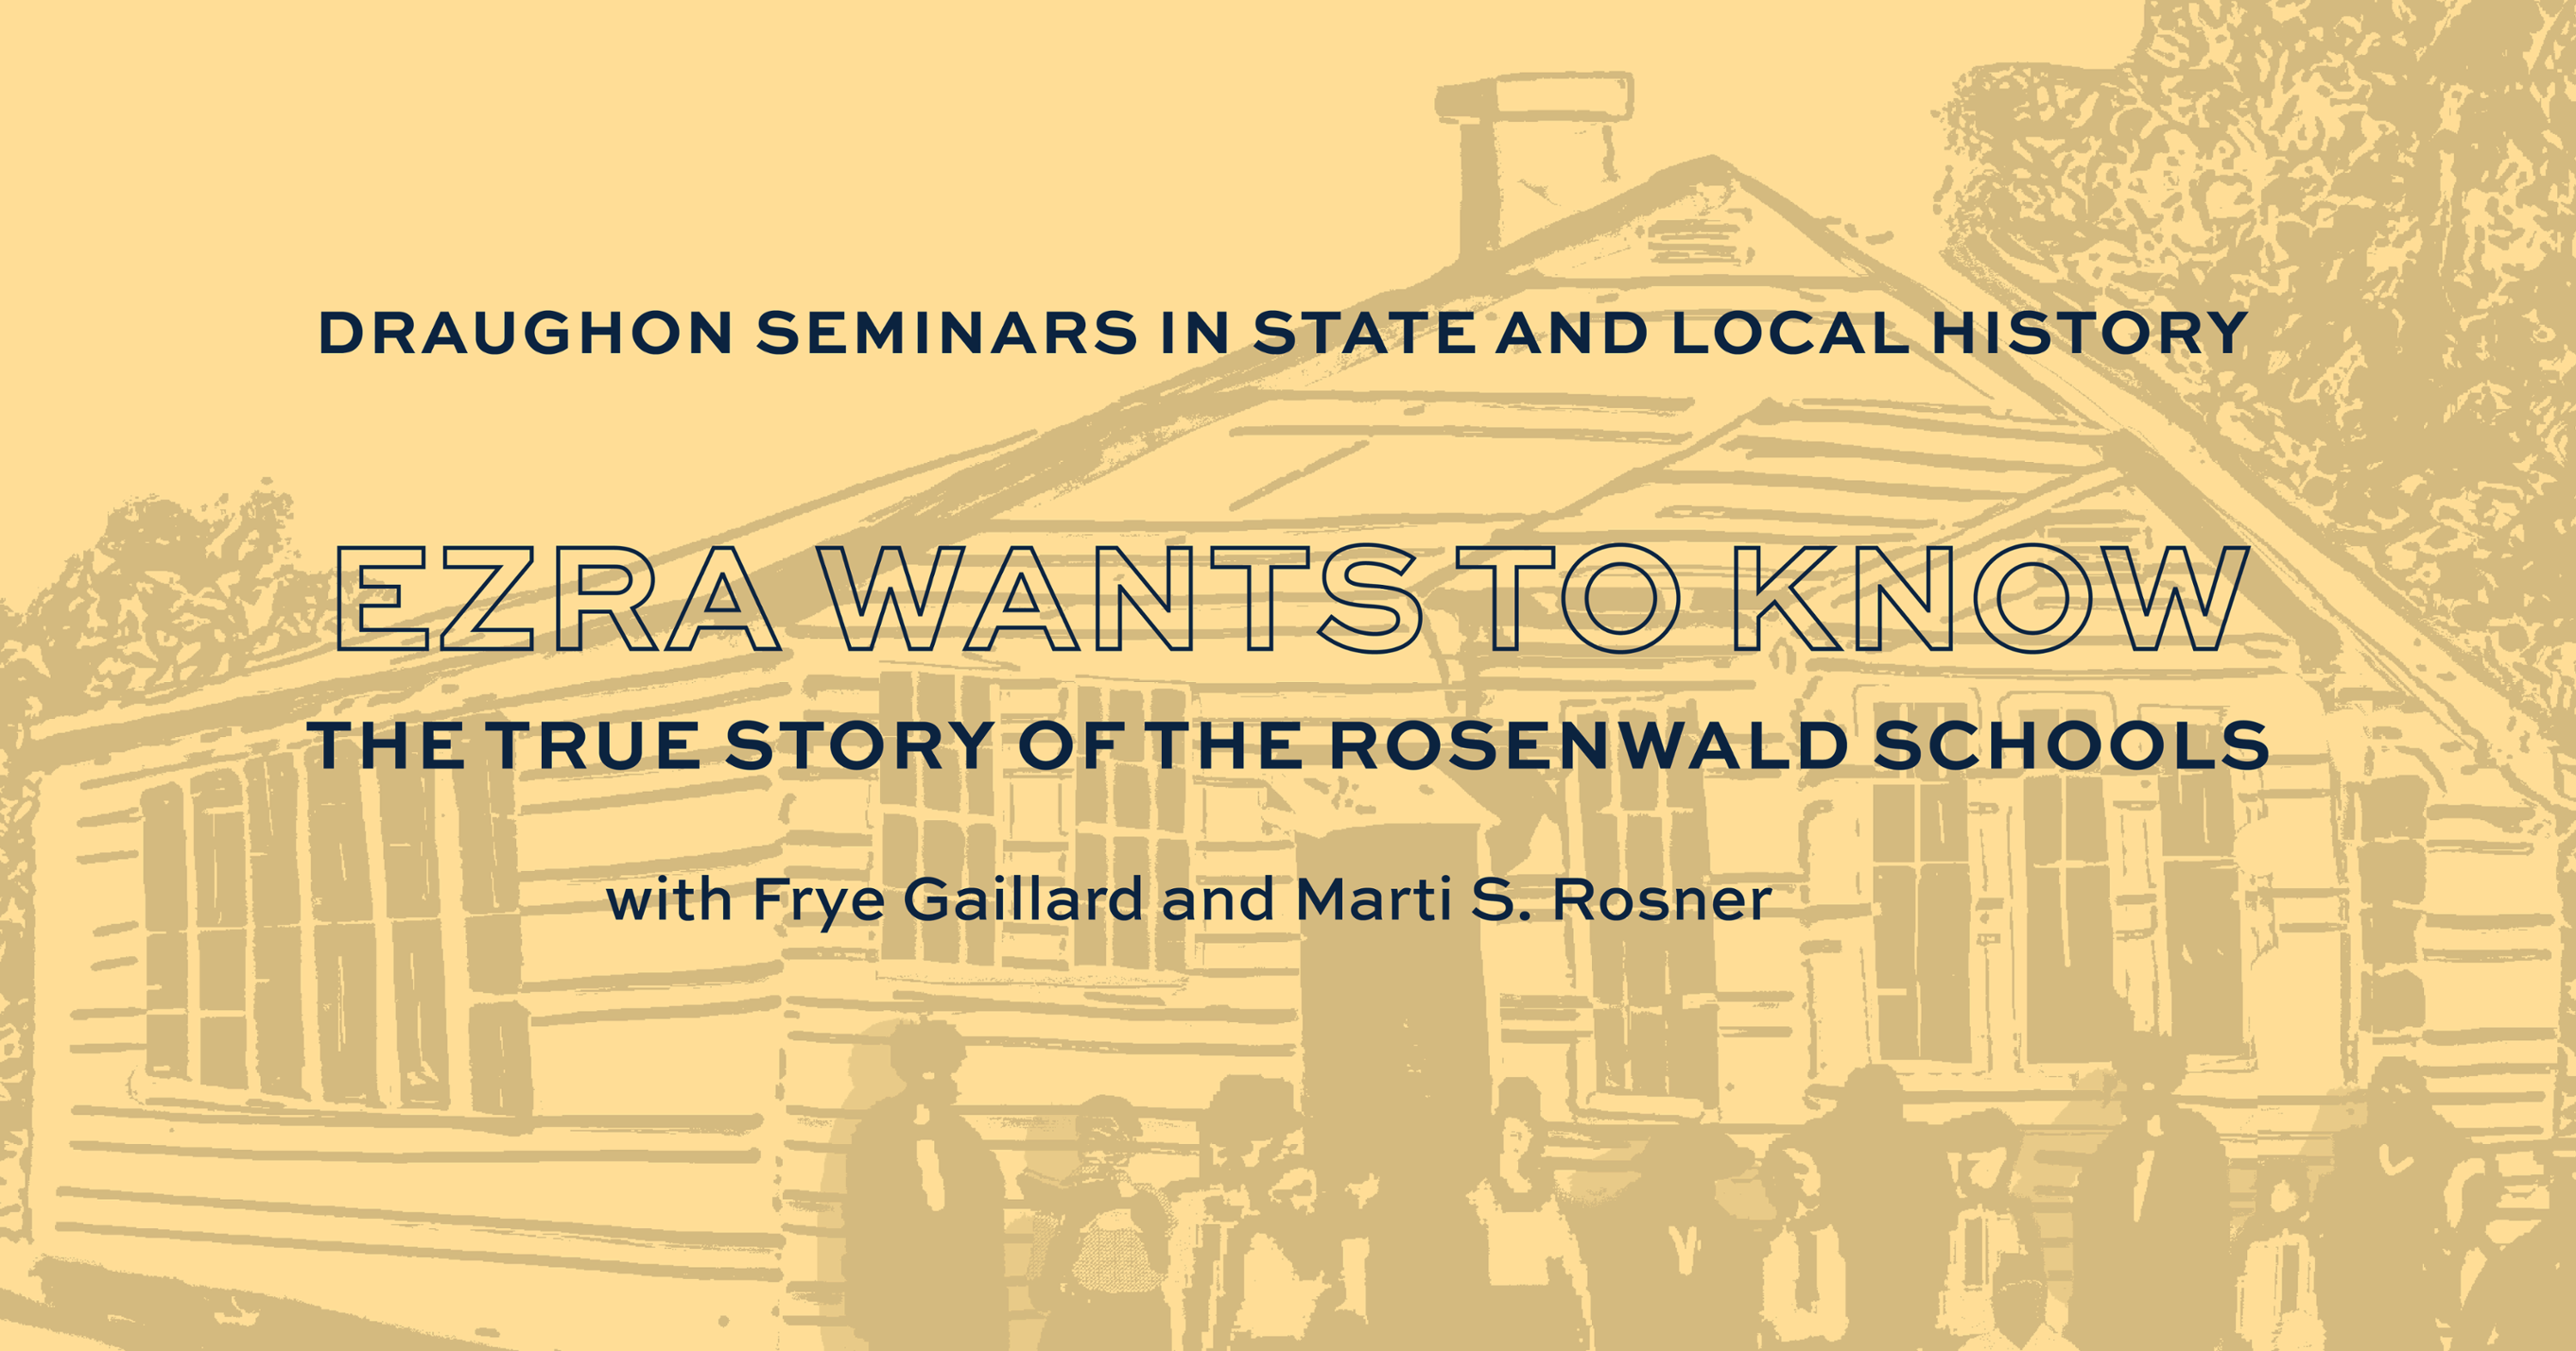 Draughon Seminars in state and local history - Ezra wants to know: The true story of the Rosenwald Schools with Frye Gaillard and Marti S. Rosner